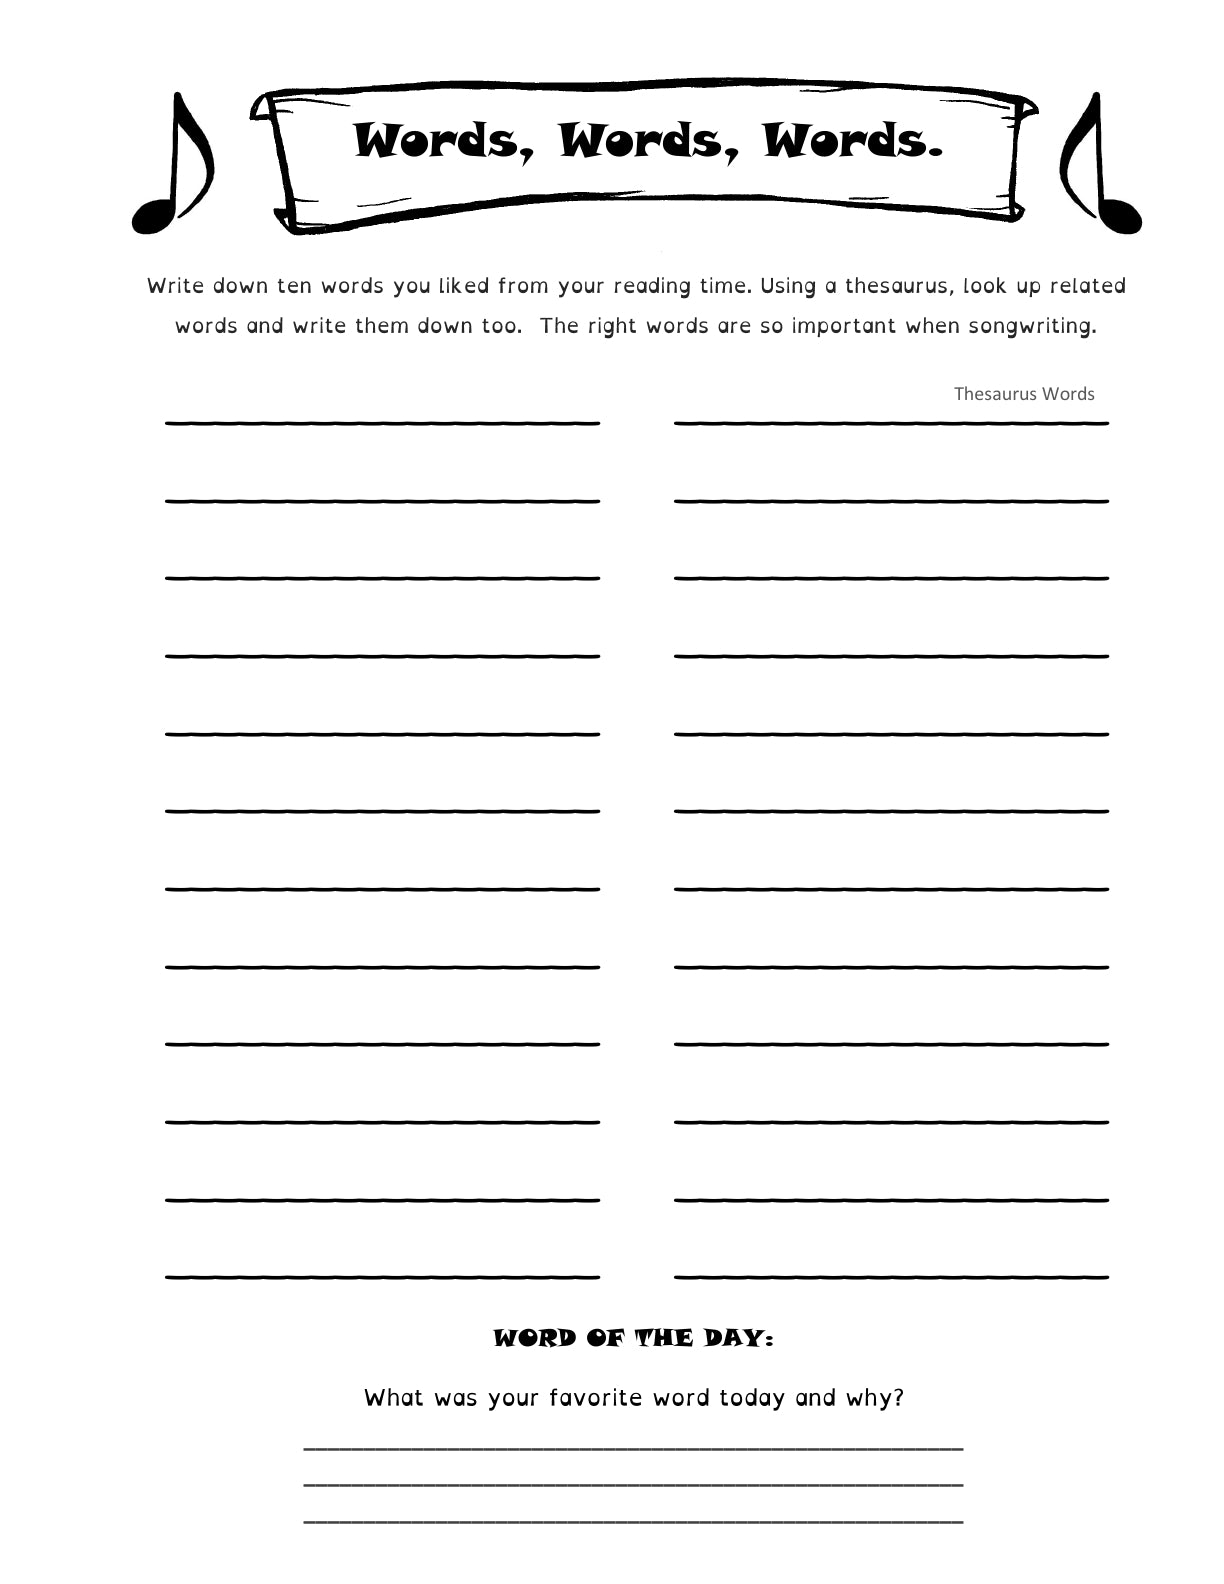 (Age 12+) The Songwriter's Fun-Schooling Journal